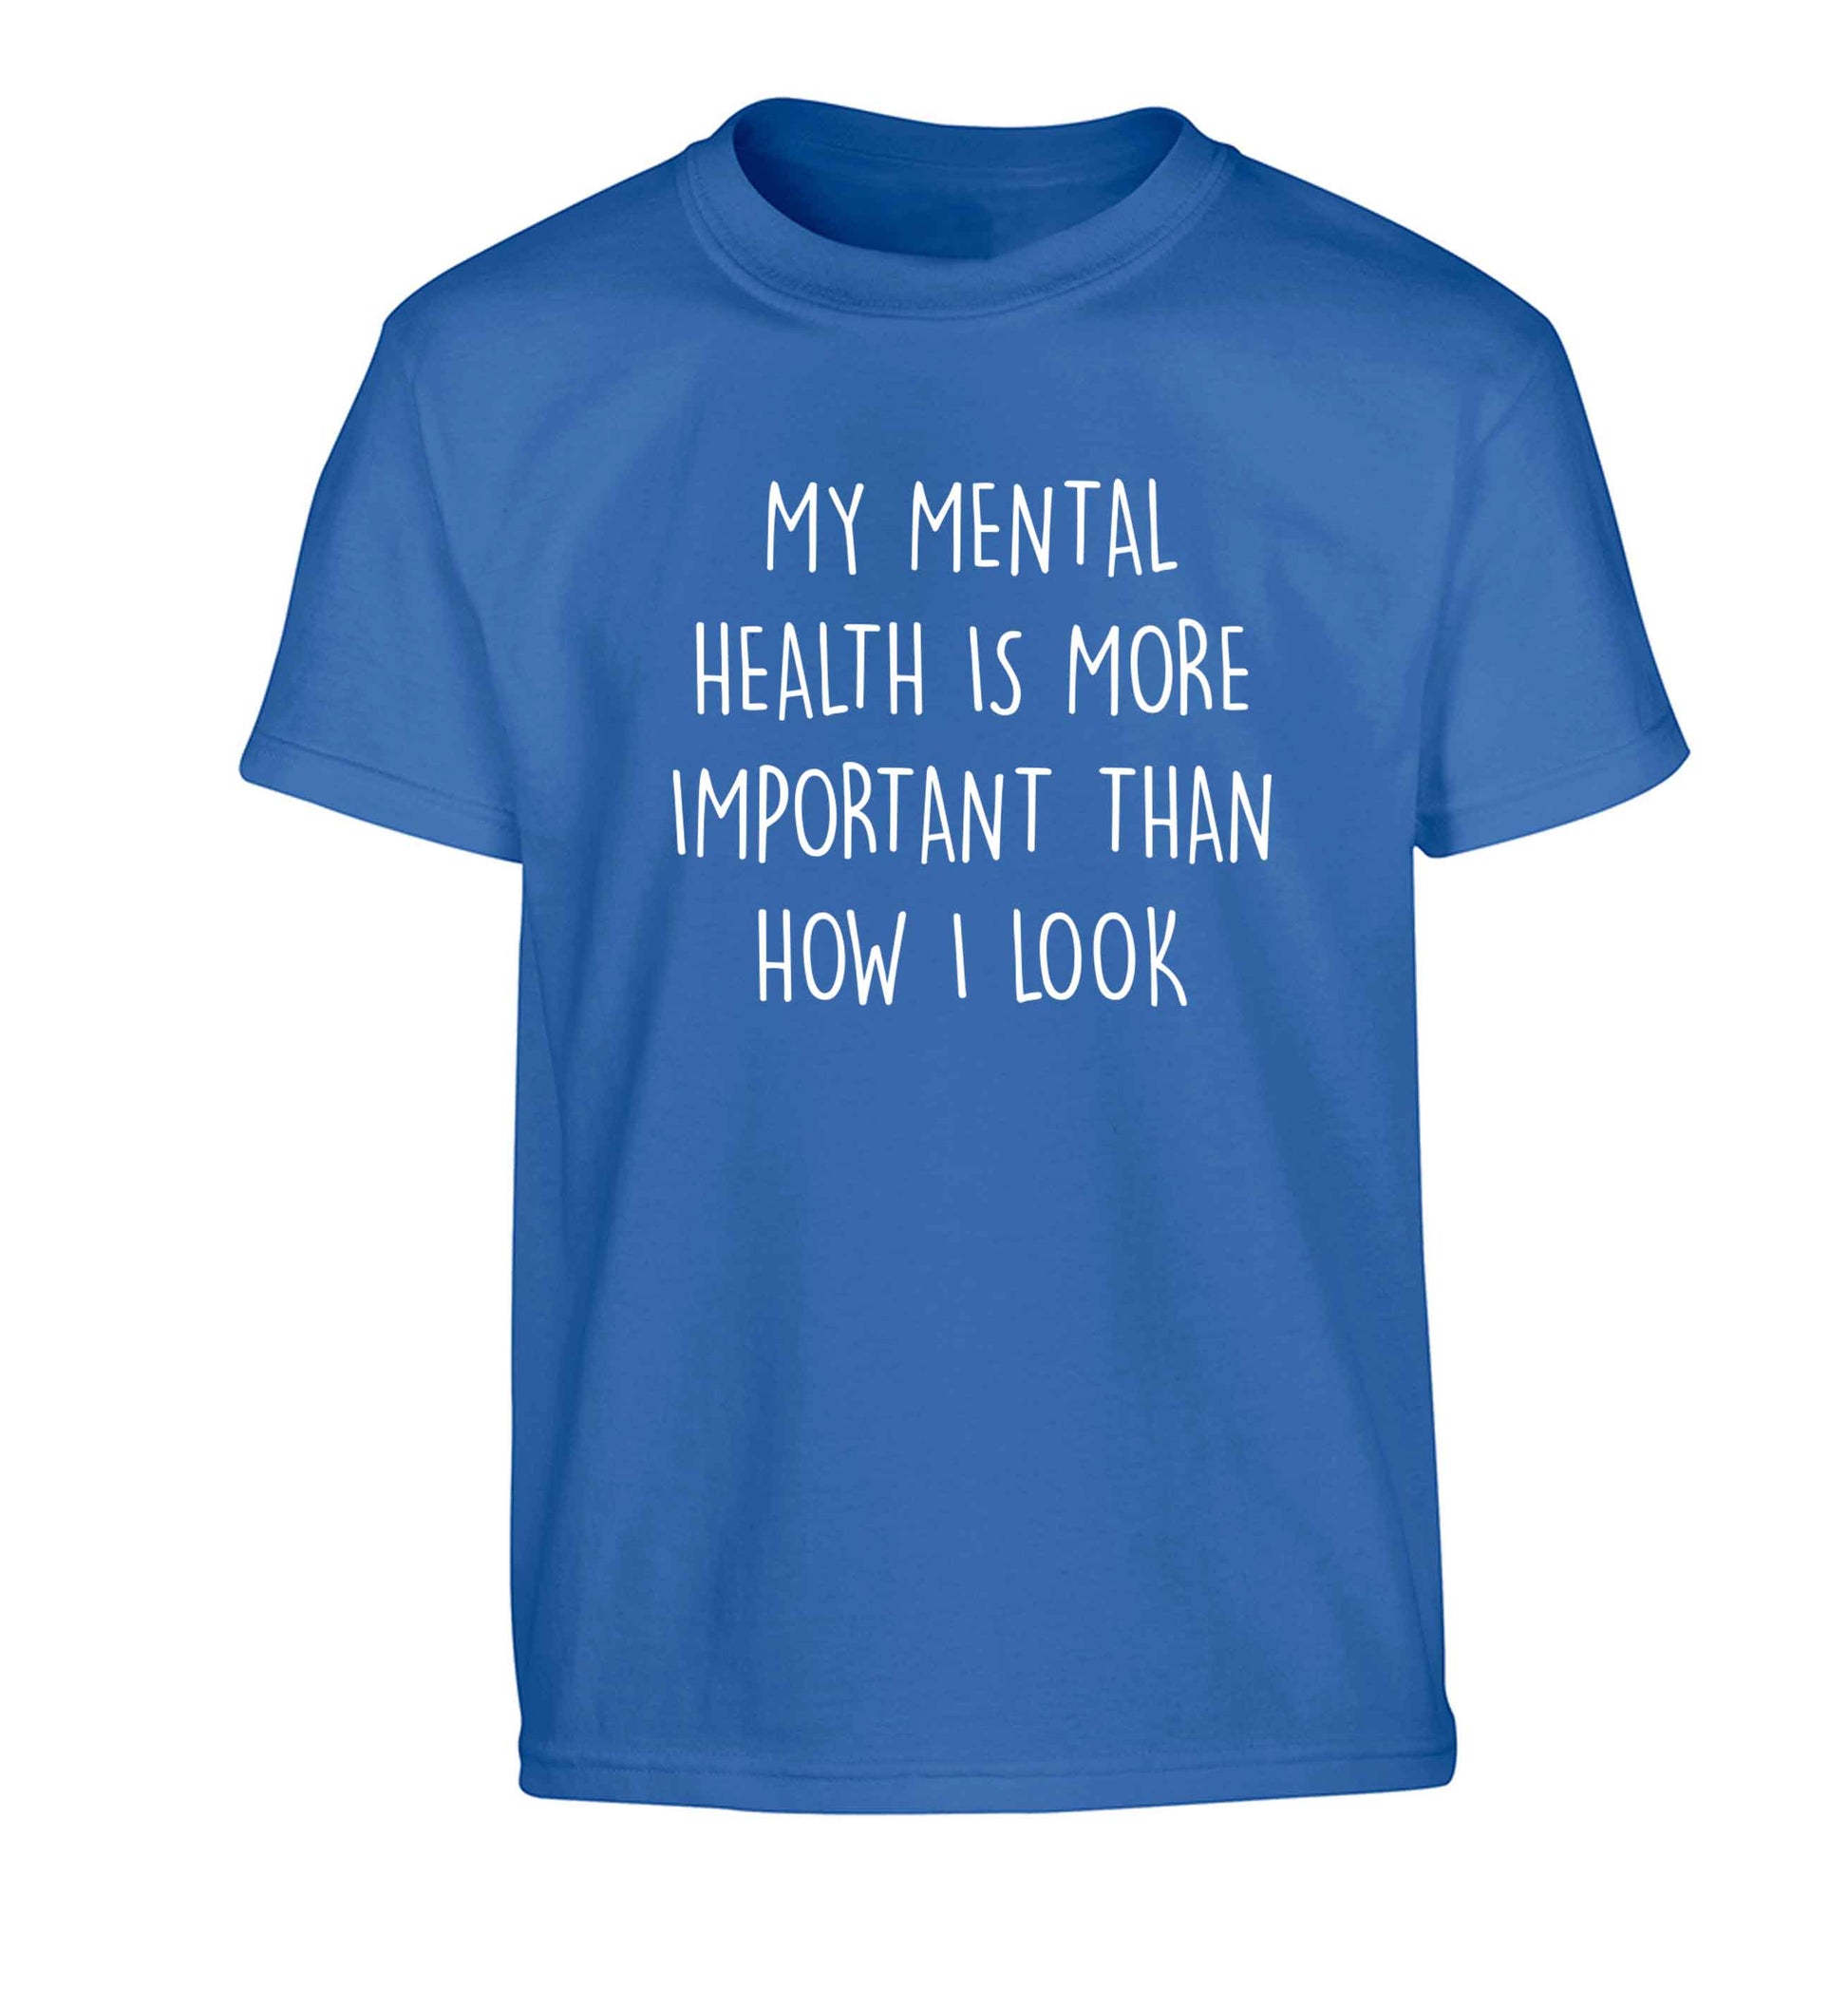 My mental health is more importnat than how I look Children's blue Tshirt 12-13 Years